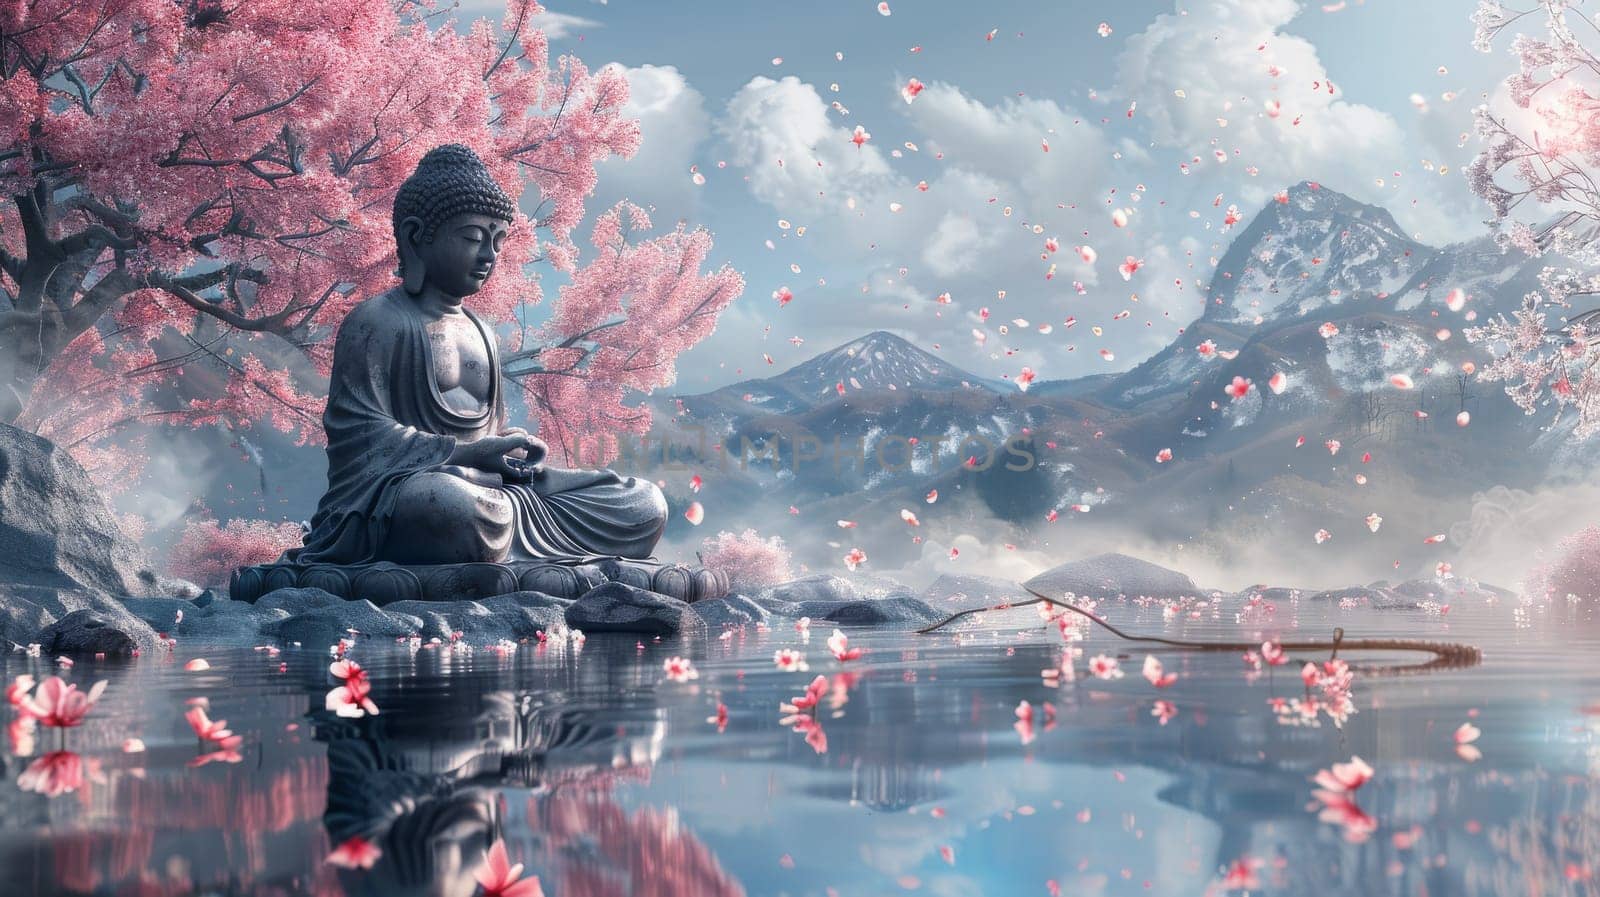 A statue of a Buddha is sitting on a tree branch with pink flowers. The scene is serene and peaceful, with the statue and flowers creating a sense of calm and tranquility